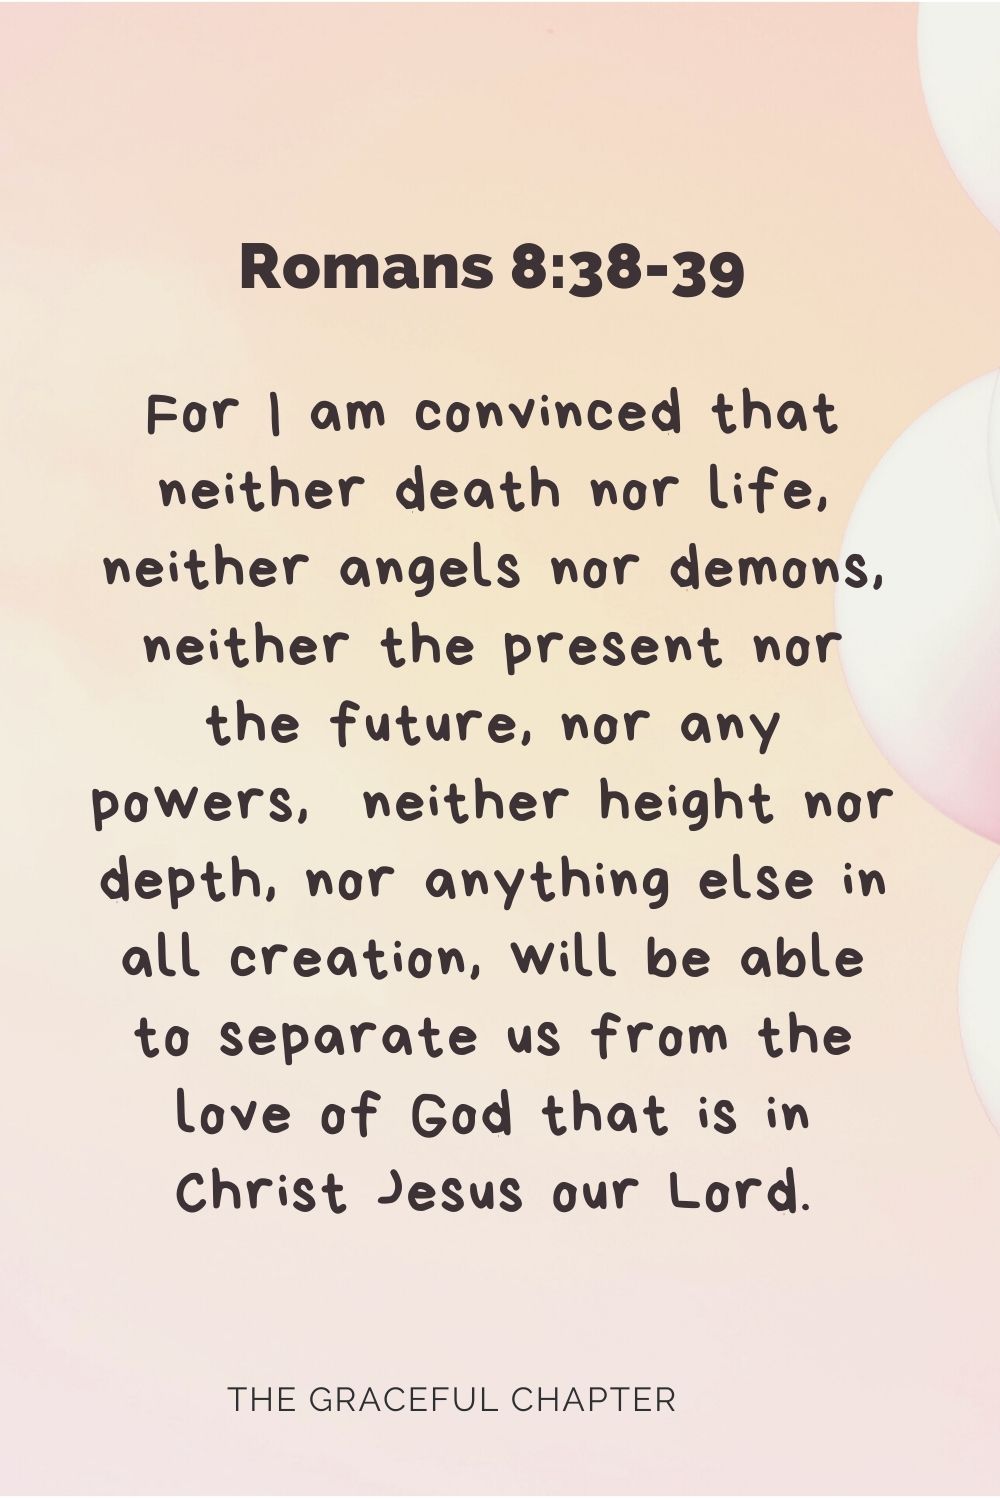 For I am convinced that neither death nor life, neither angels nor demons, neither the present nor the future, nor any powers,  neither height nor depth, nor anything else in all creation, will be able to separate us from the love of God that is in Christ Jesus our Lord. Romans 8:38-39